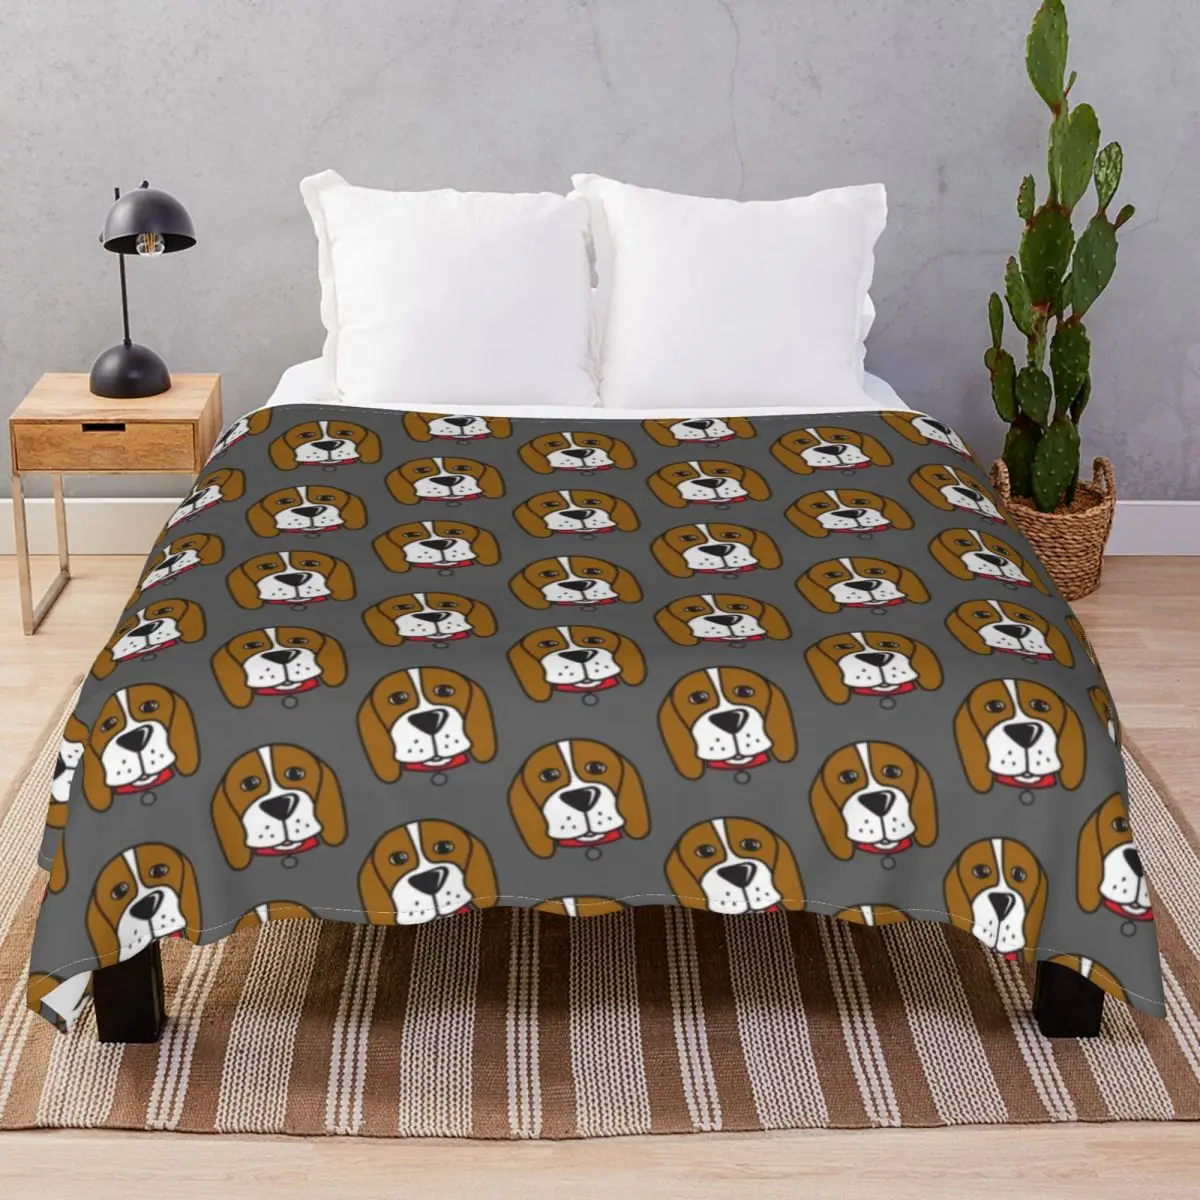 Beagle Rescue Victoria Merch Blanket Flannel Spring Autumn Soft Throw Blankets for Bedding Home Couch Camp Cinema